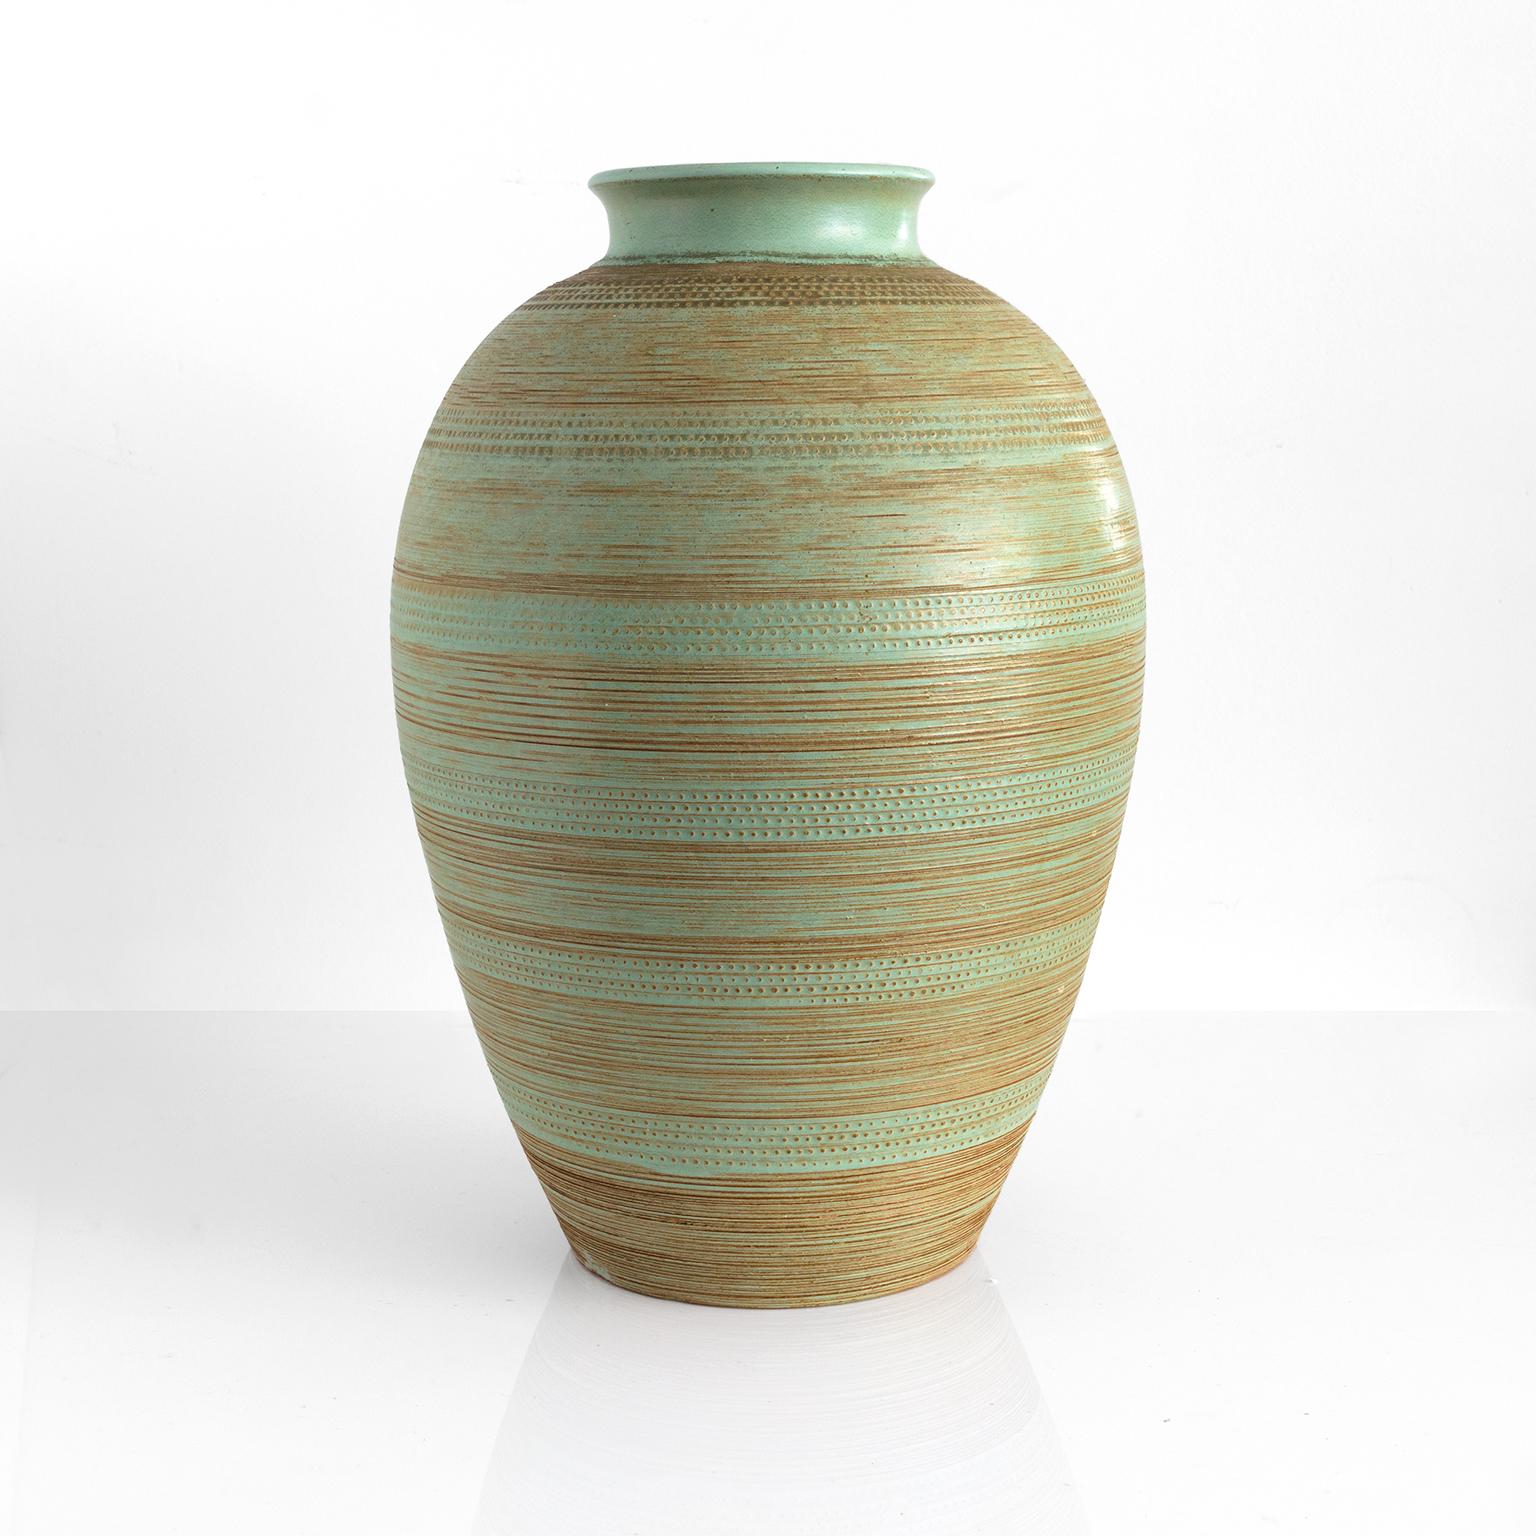 A large Scandinavian Modern hand textured ceramic vase with a light green glaze over a brown clay body. Made by Andersson & Johansson, Höganäs, Sweden circa 1950

Measures: Height: 17